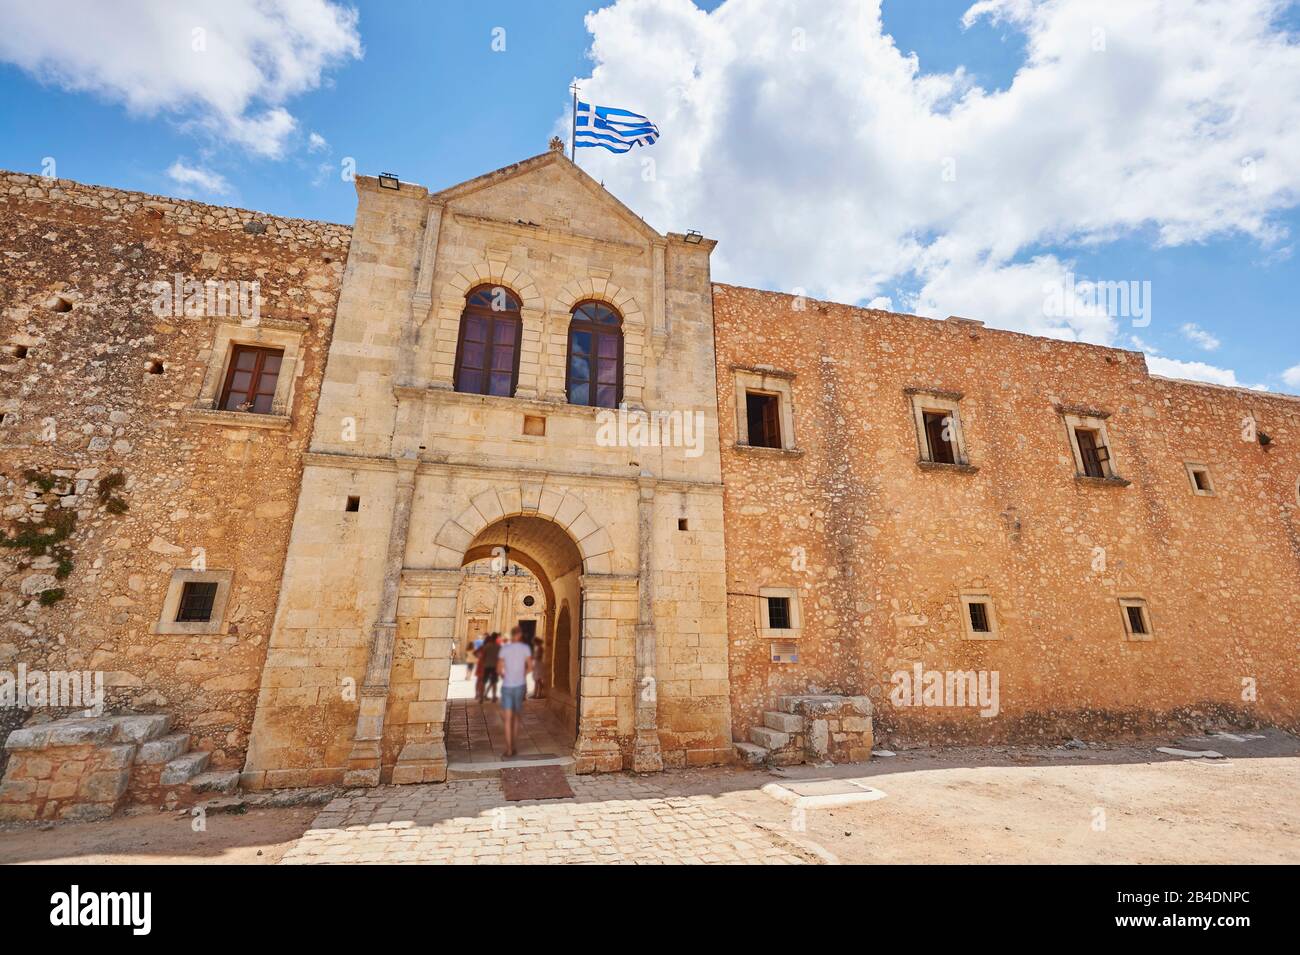 Old Town, Moni Arkadi Monastery, National Monument of Crete in the struggle for independence, exterior view, Arkadi Monastery, Crete, Greece Stock Photo